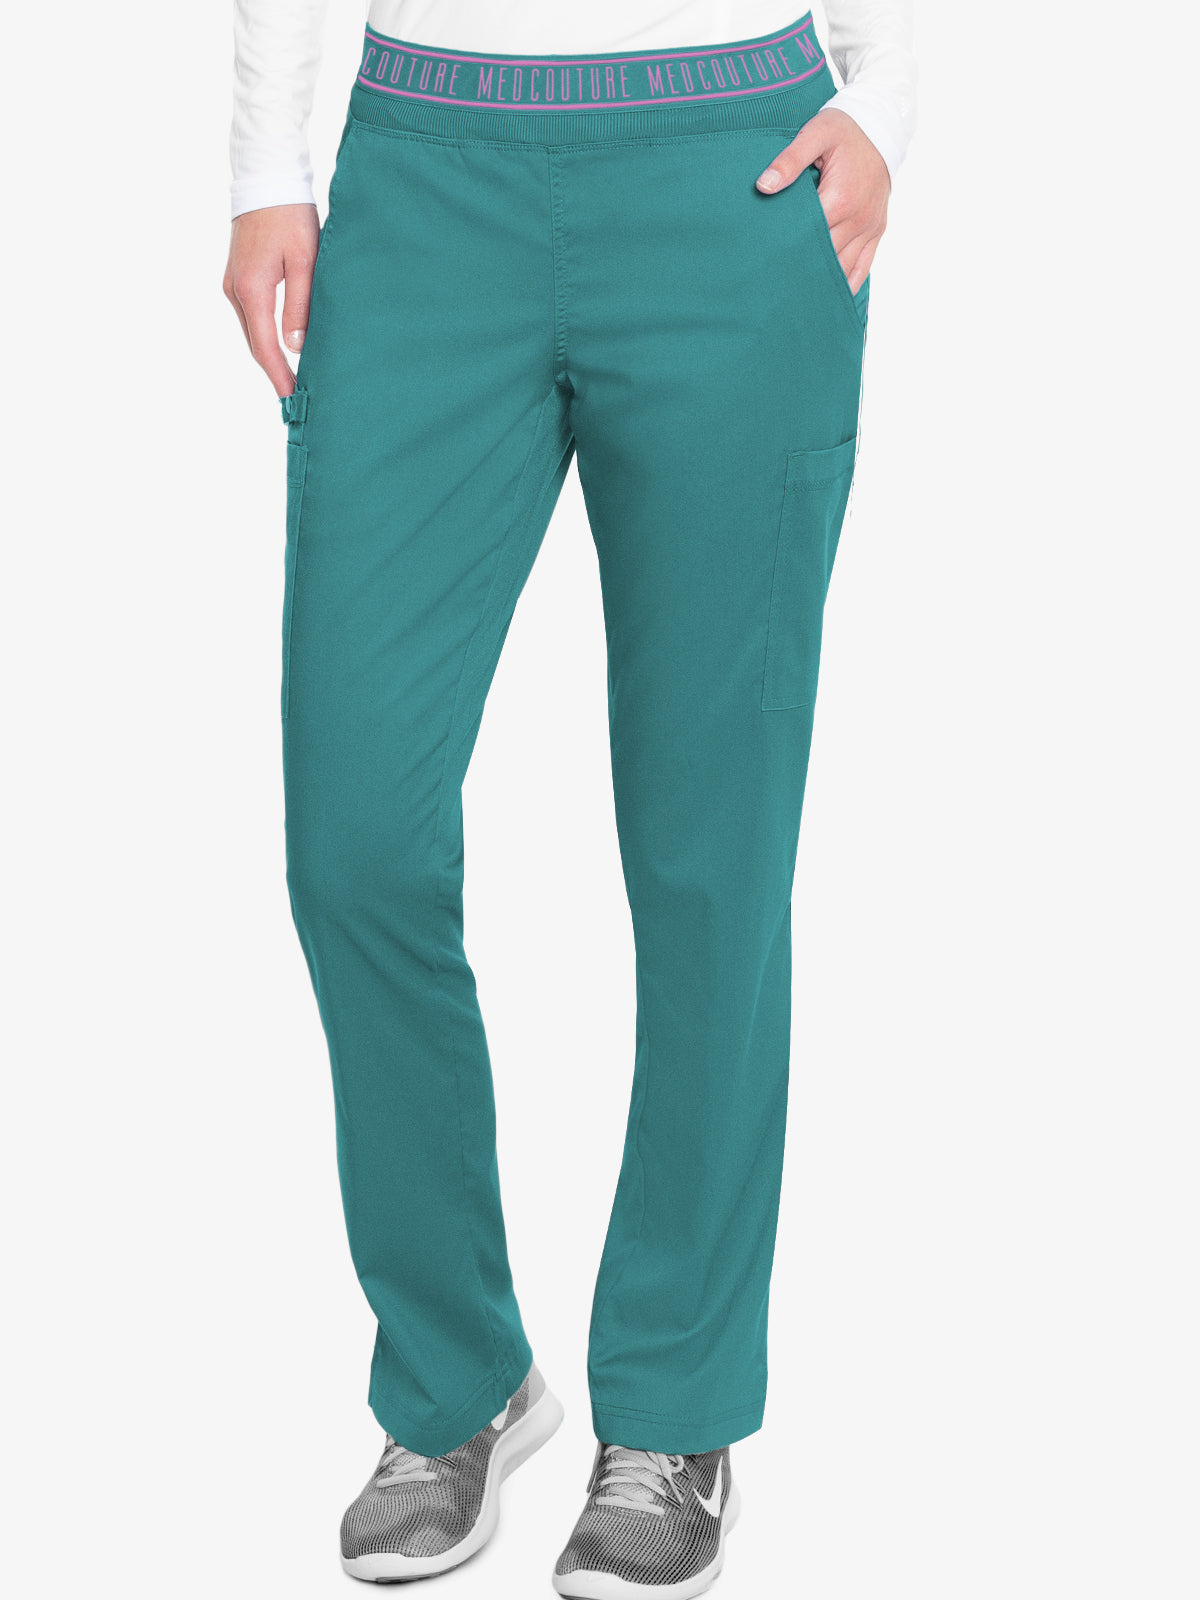 Med Couture Yoga Cargo Pant (P)